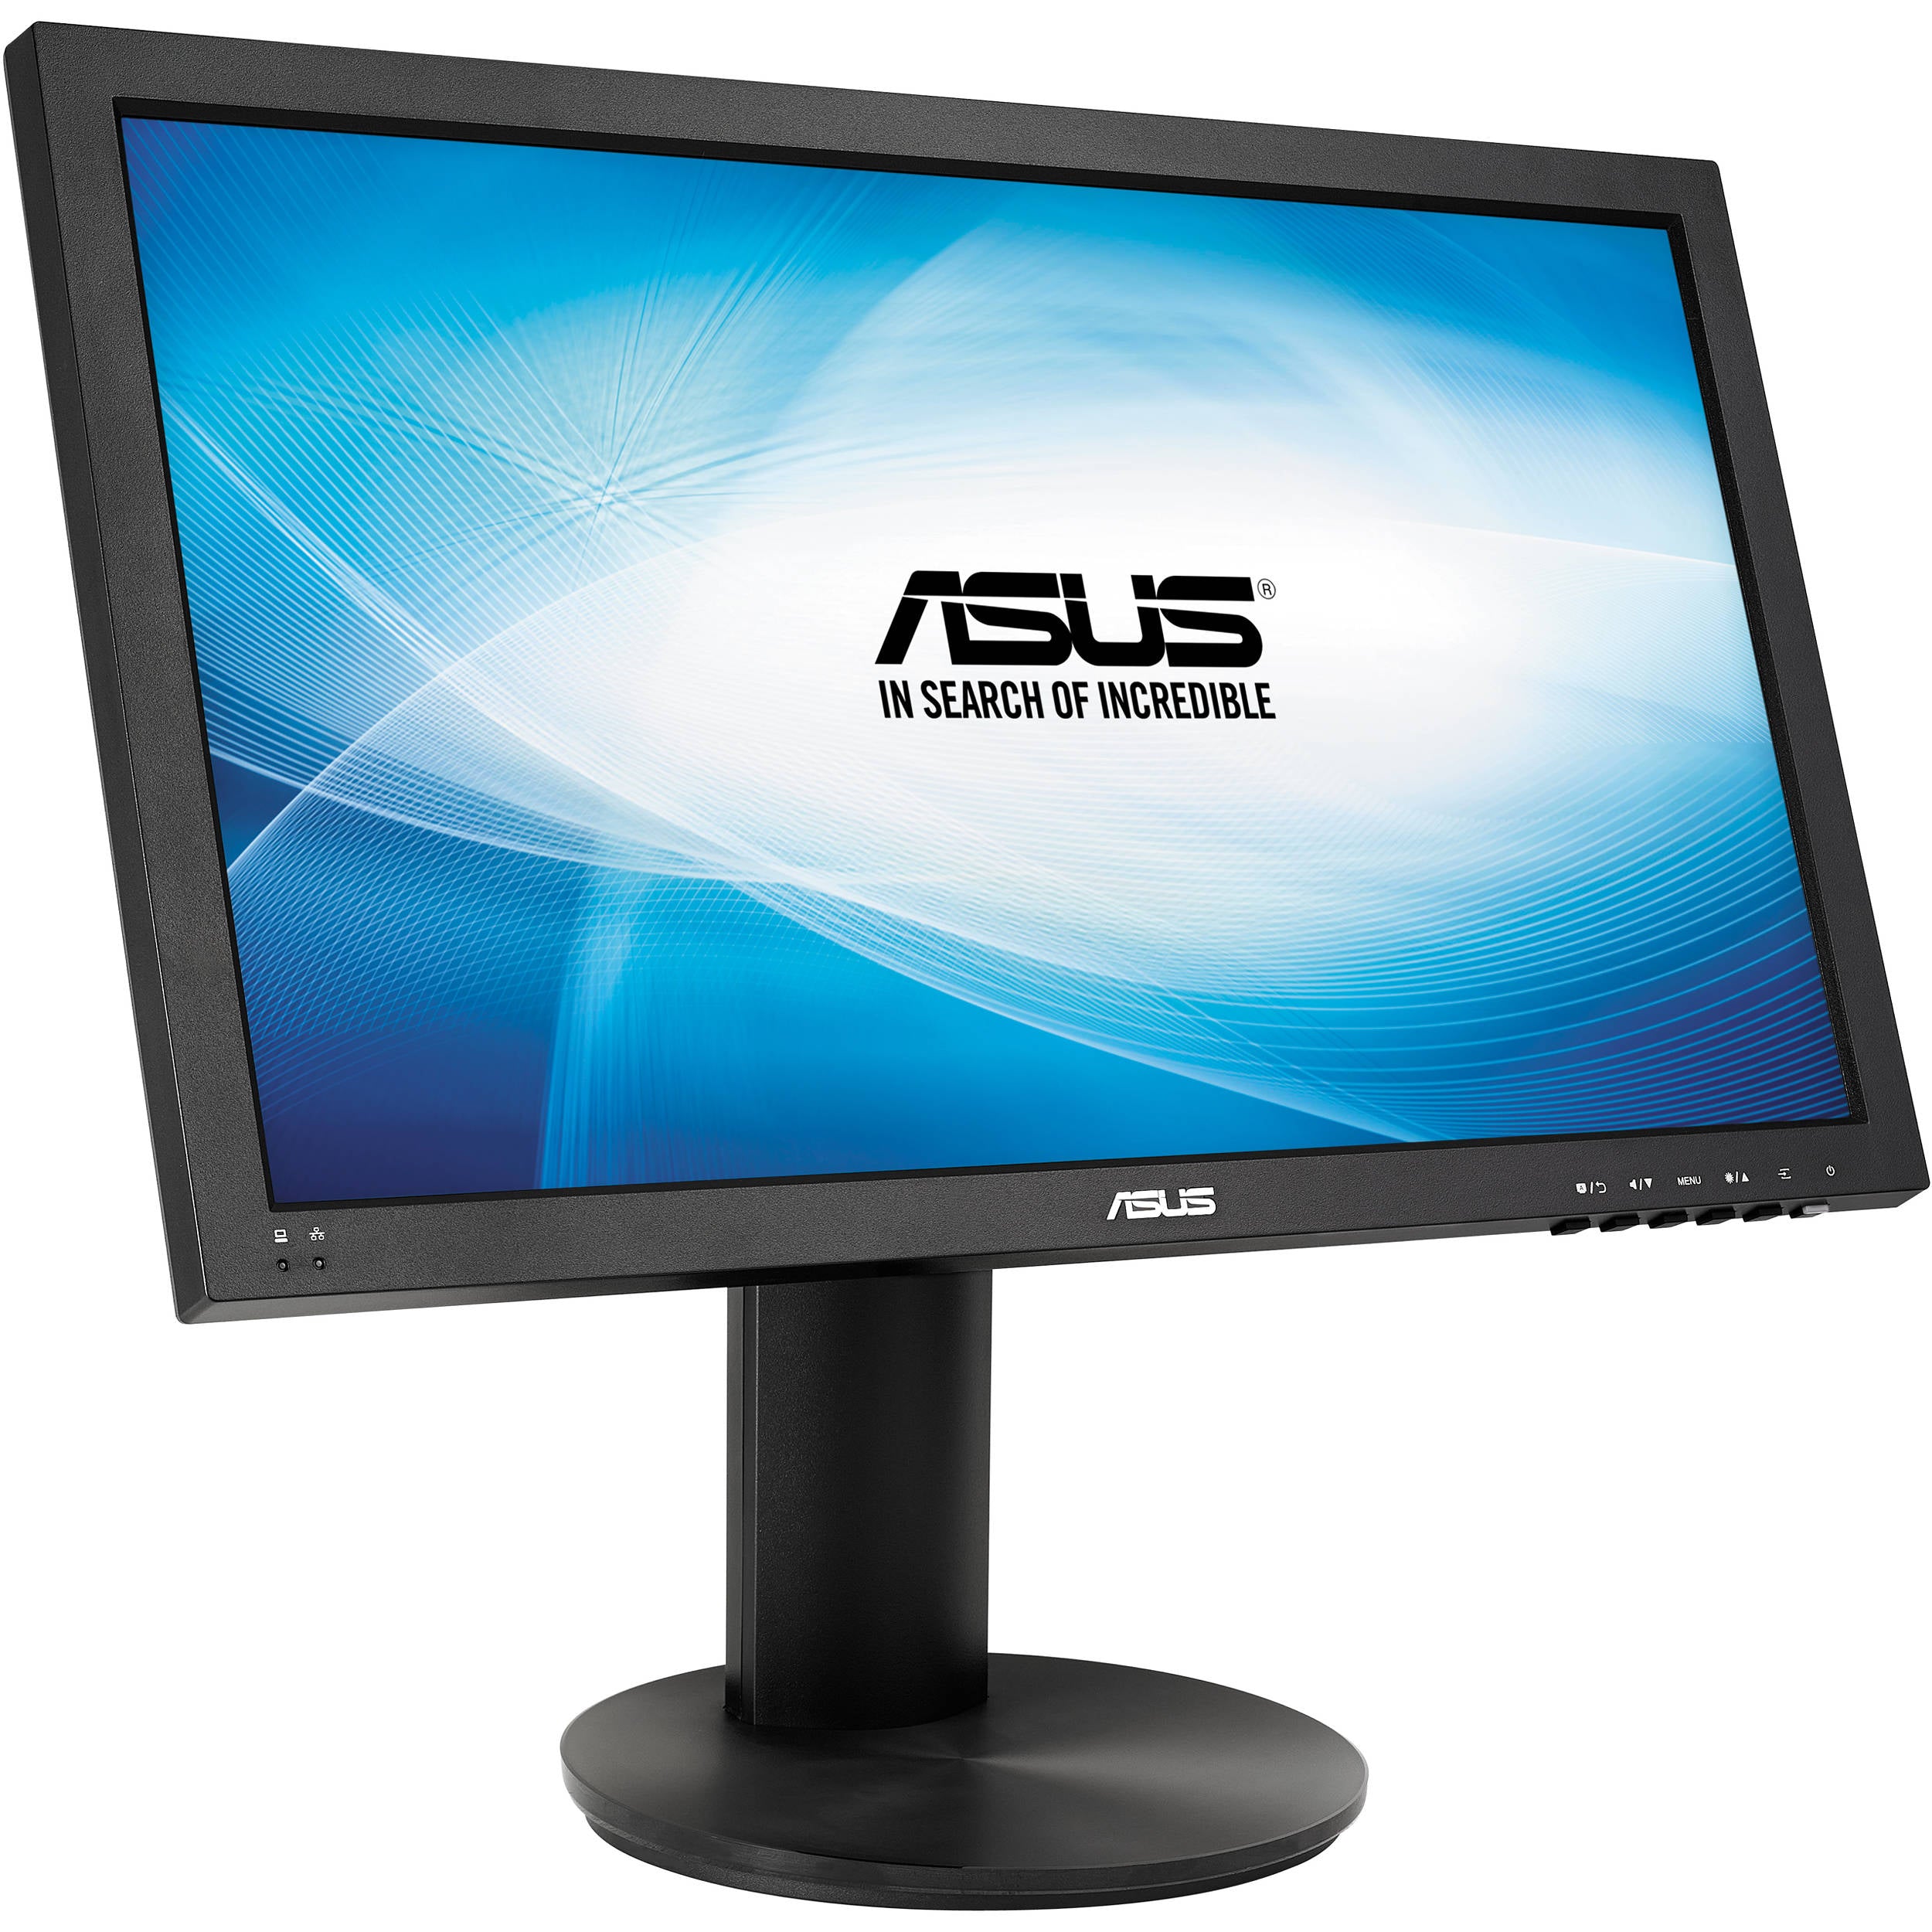 ASUS CP220-B Zero Client 22" LED Monitor - B Grade Certified Refurbished